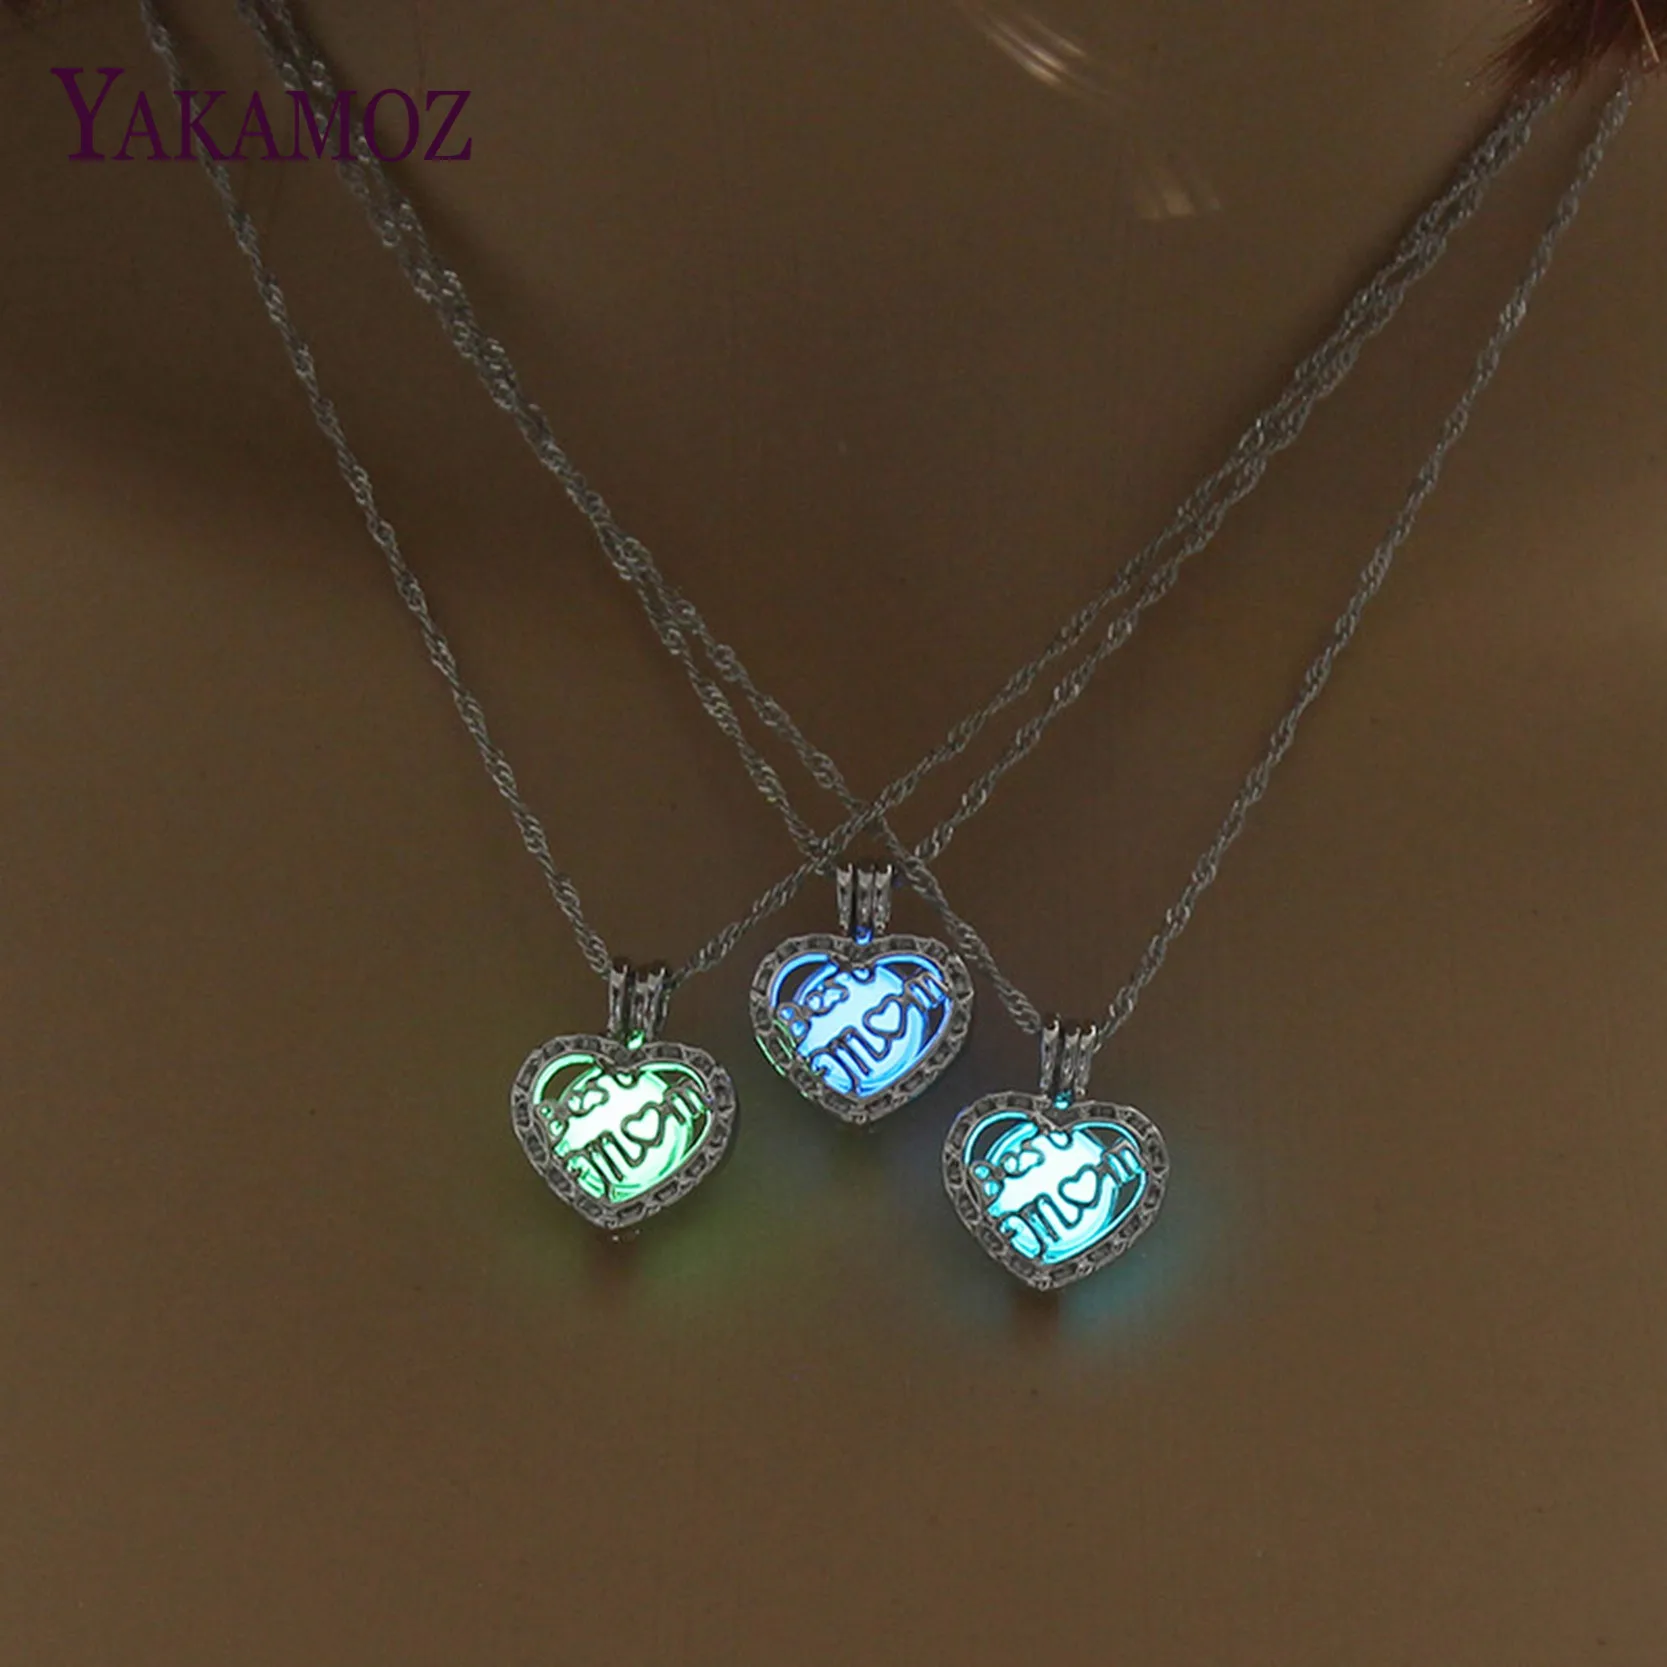 

Best MOM Luminous Necklace Heart Shape Pendant Choker Glowing Necklace Women Silver Color Chain Gift For Mom Jewelry N1223